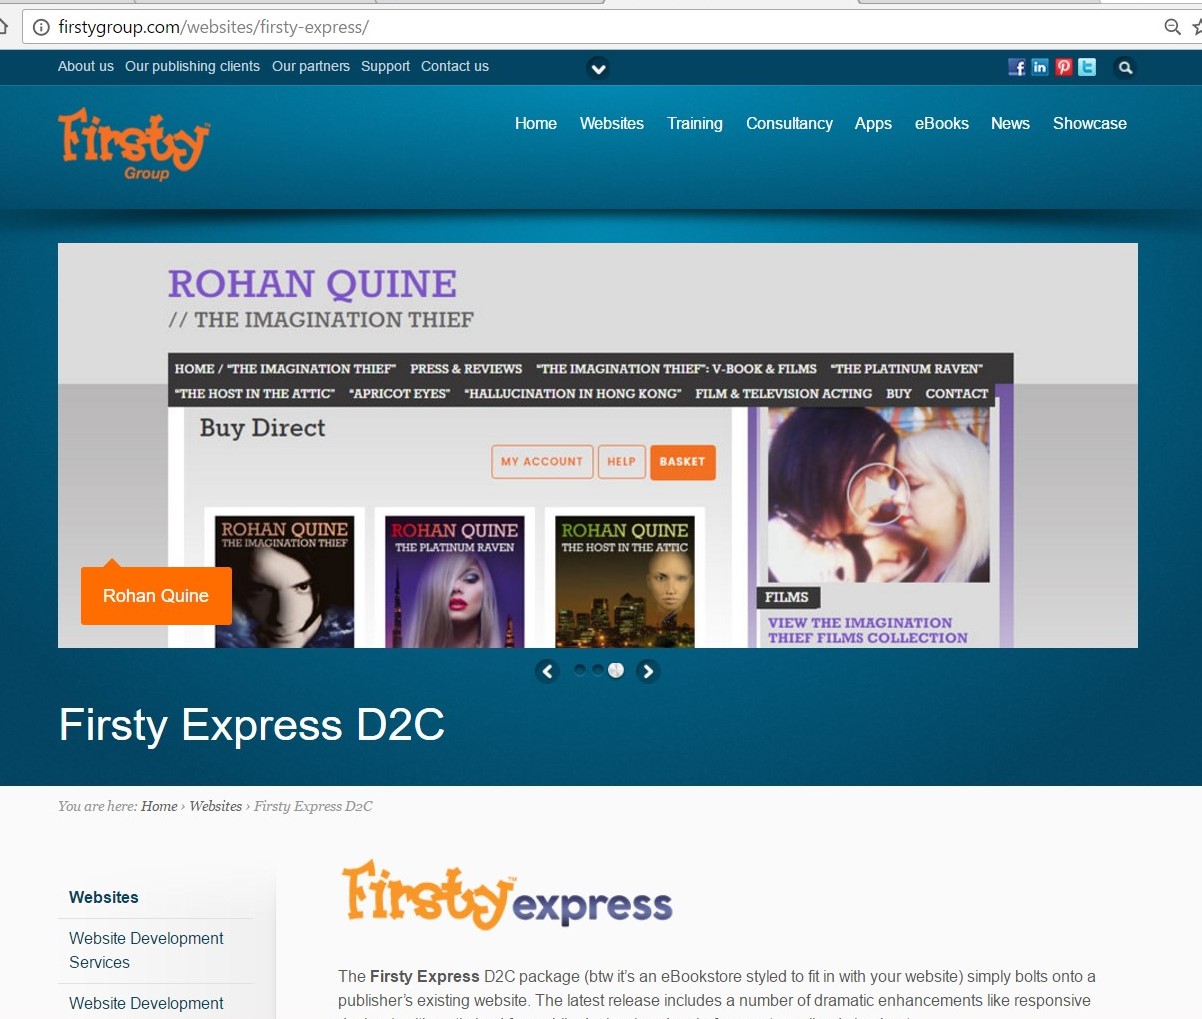 Rohan Quine's website in Firsty Express showcase 4